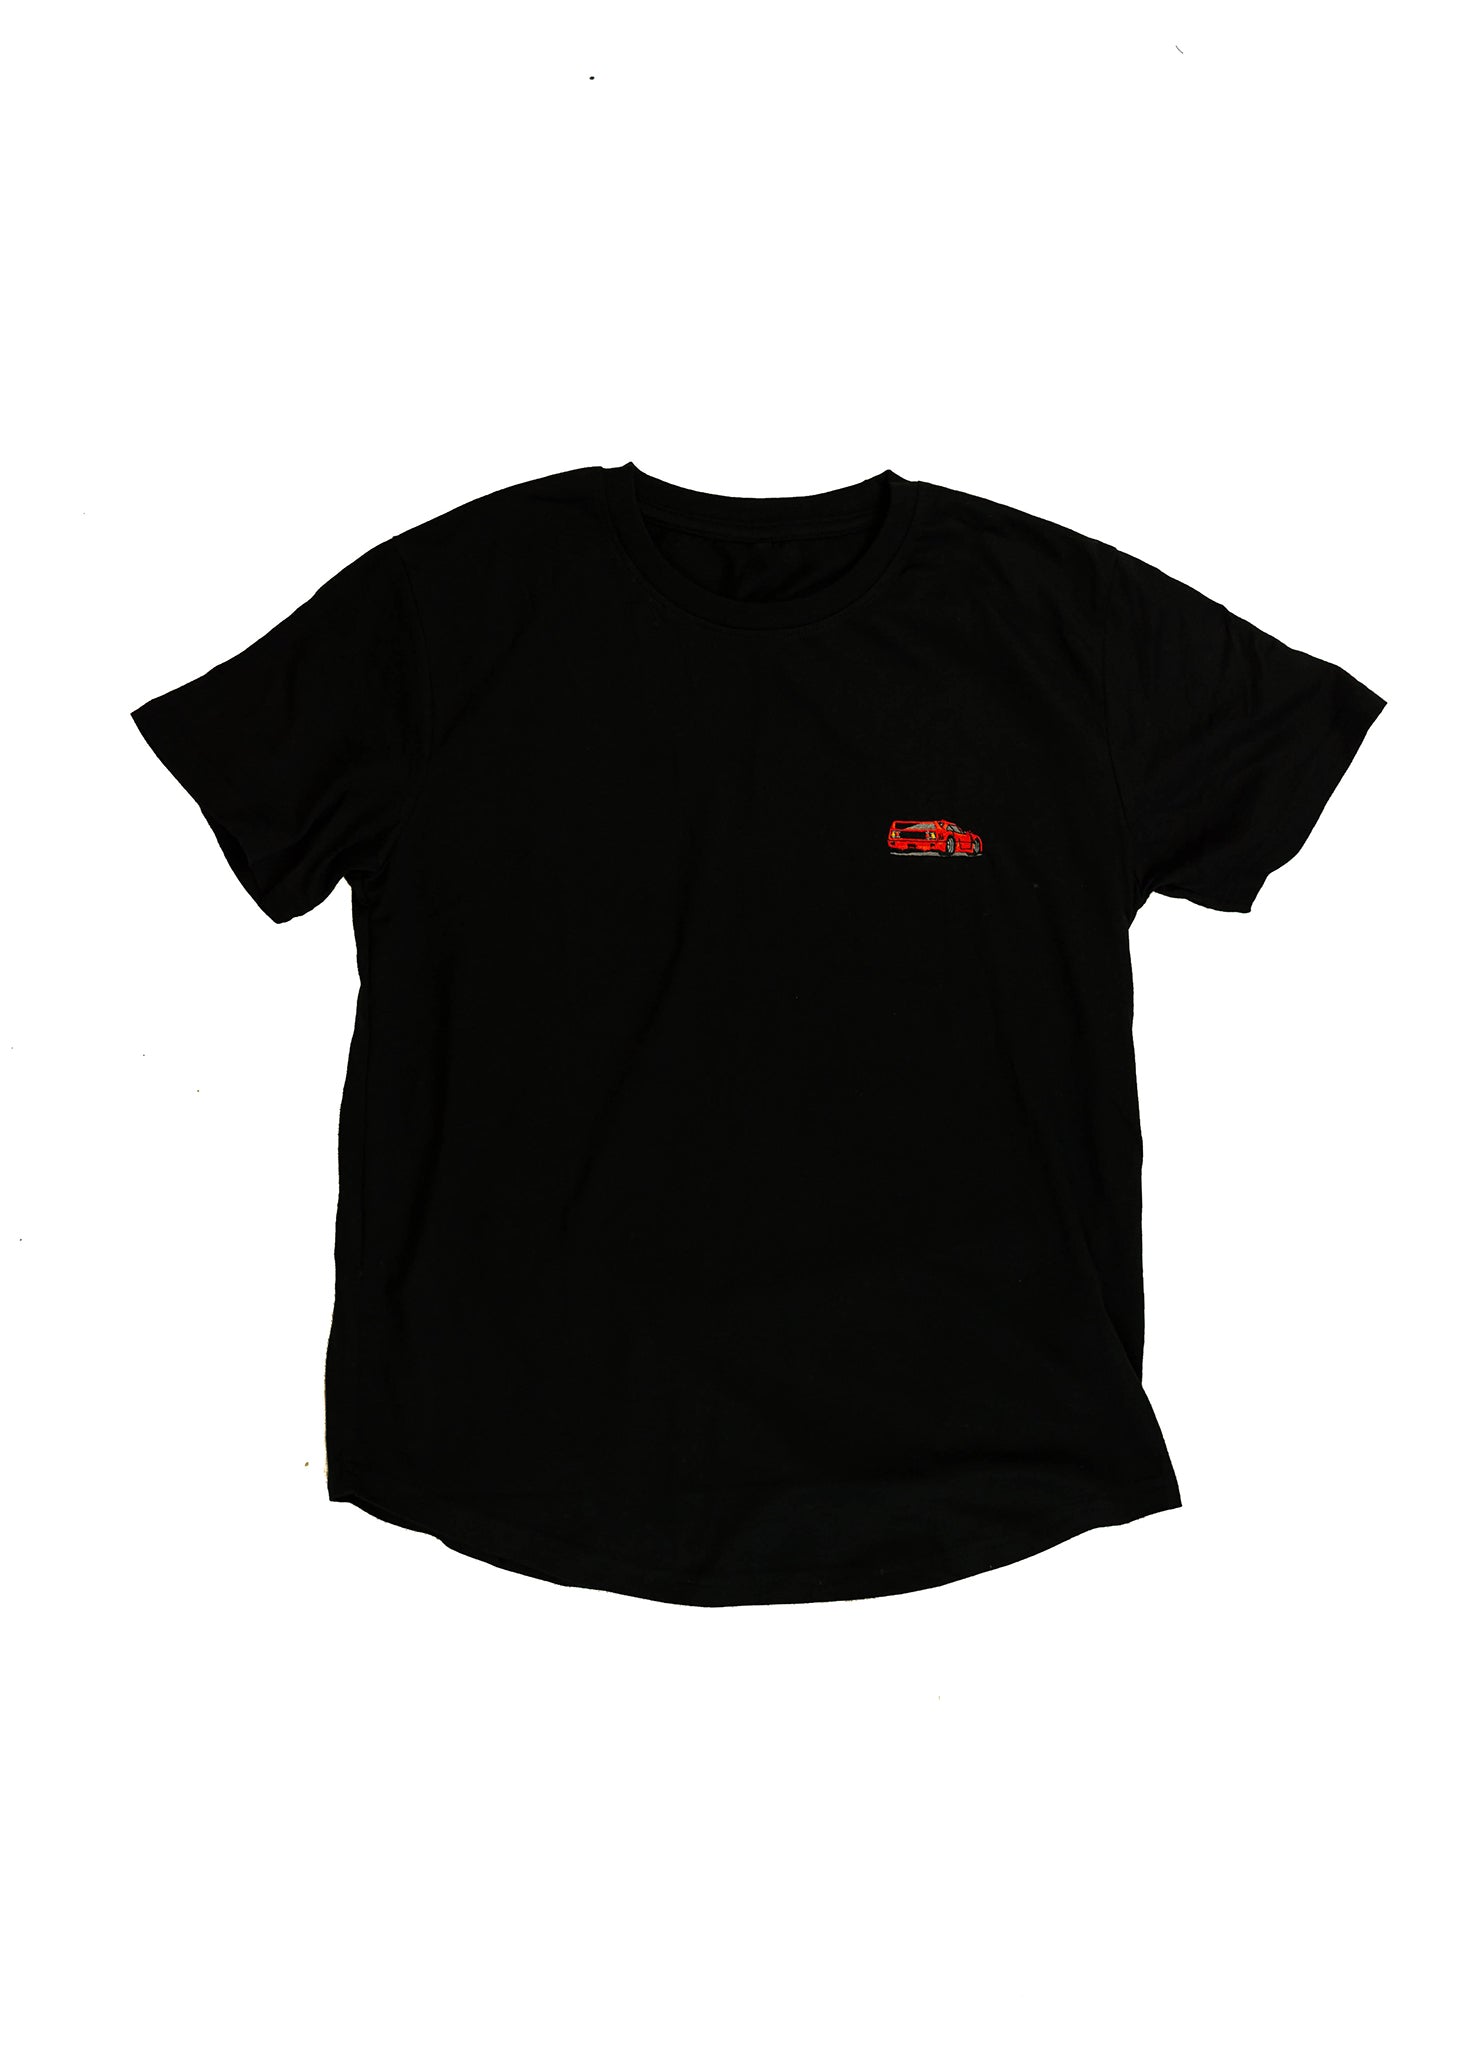 A black men's cotton t-shirt. Full size front view of the black shirt with a red embroidered F40. Fabric composition is a mix of polyester and cotton. The material is very soft, stretchy, and non-transparent. The style of this t-shirt is short sleeve, round bottom, crewneck, with embroidery on the left chest.